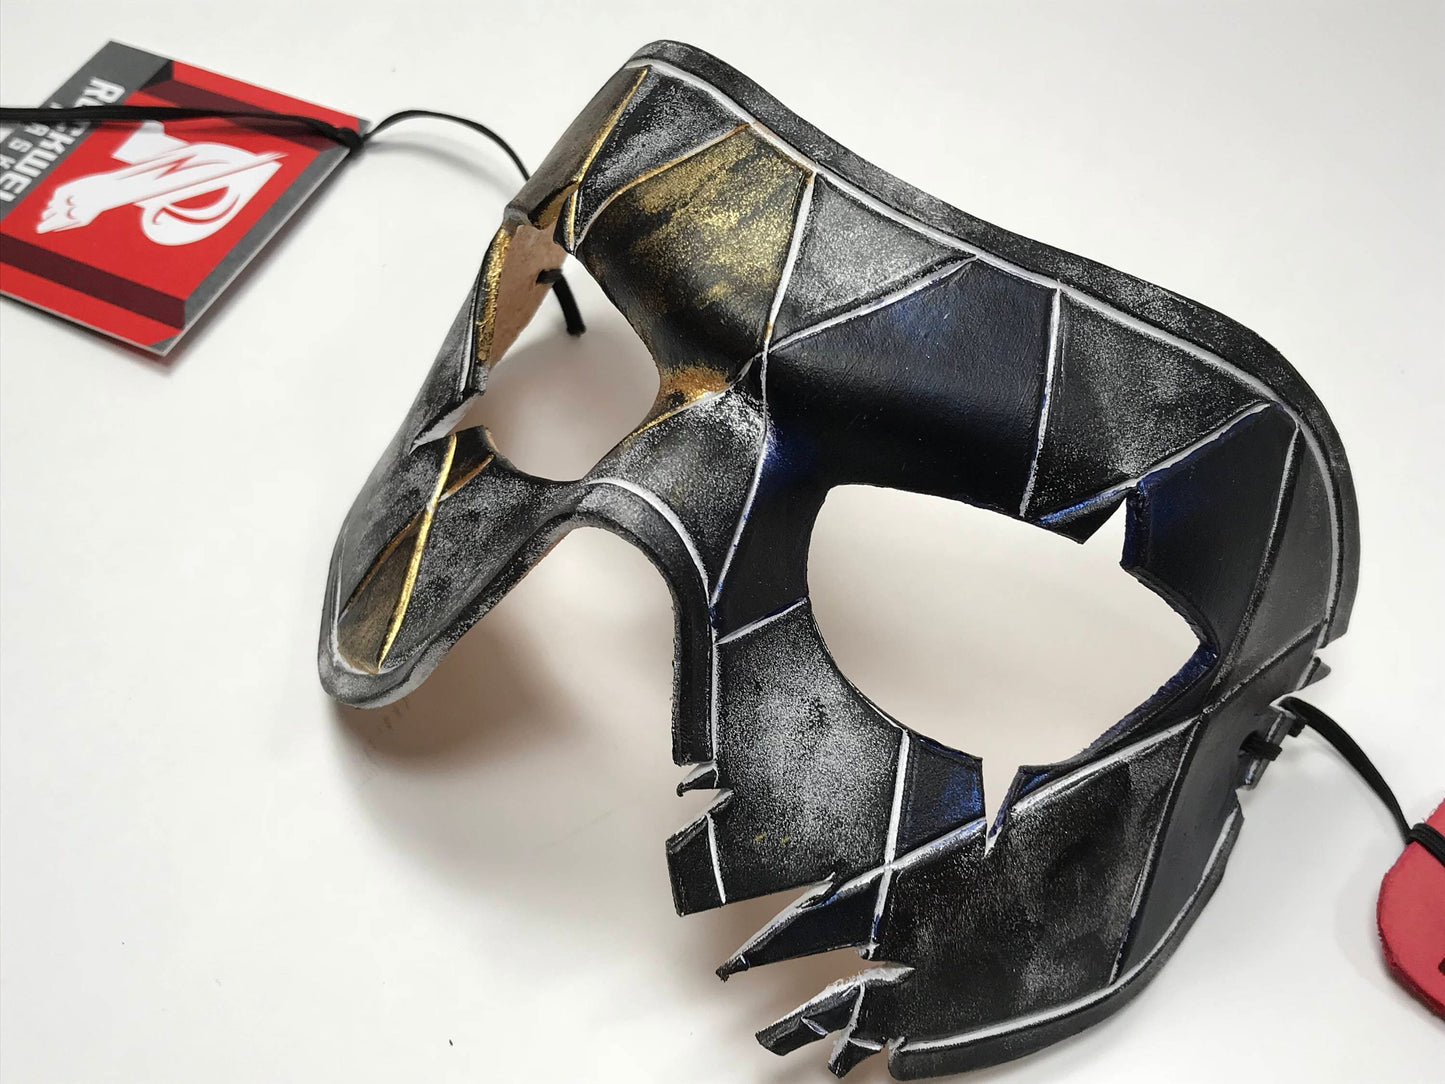 Harlequin Handmade Genuine Leather Mask in Blue White Black and Gold